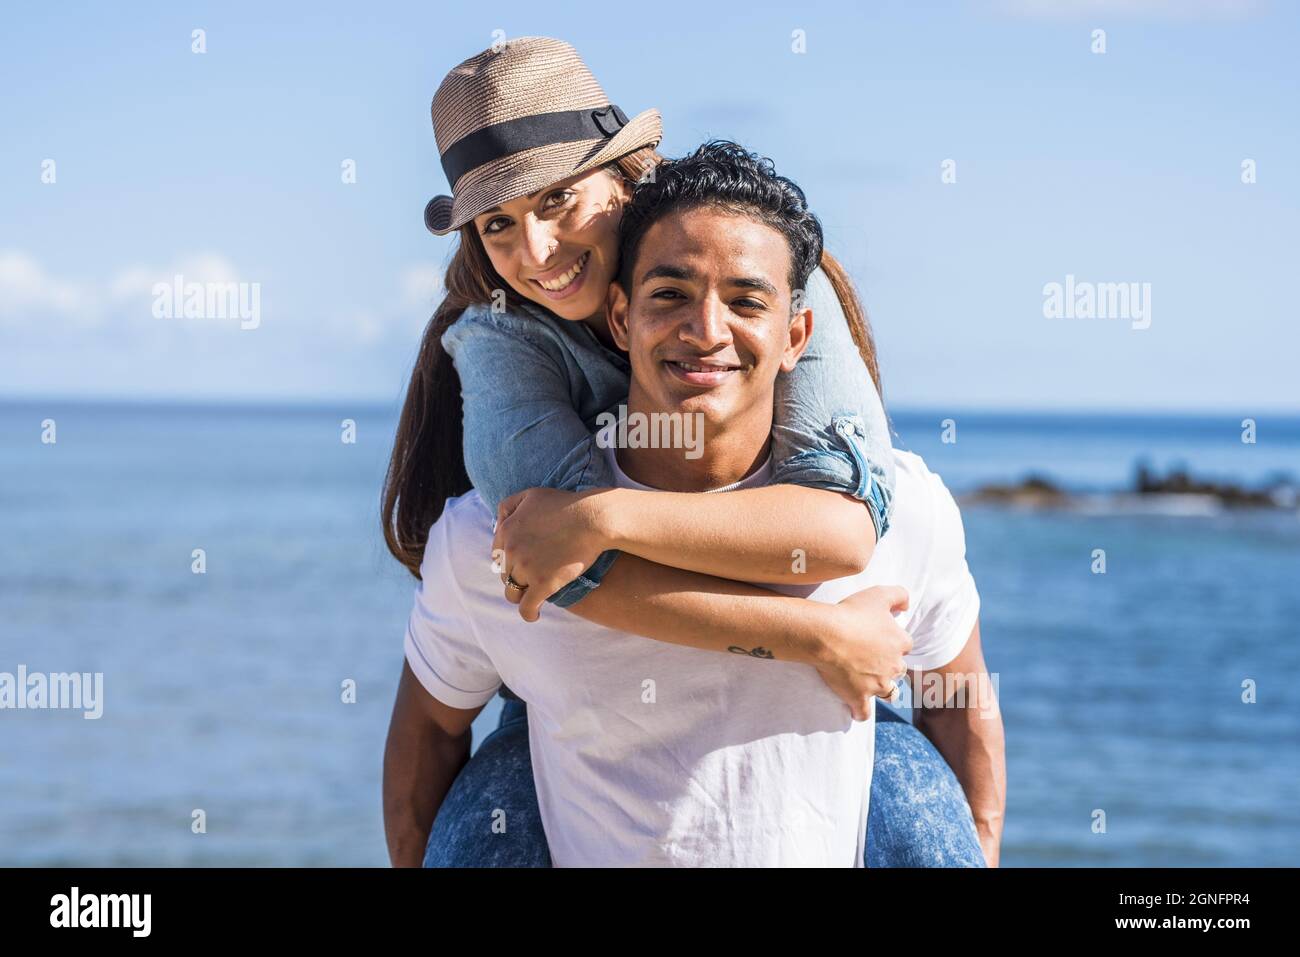 Carefree couple spending leisure time together outdoors, man giving piggyback ride to beautiful girlfriend in front of seascape during summer holiday. Stock Photo